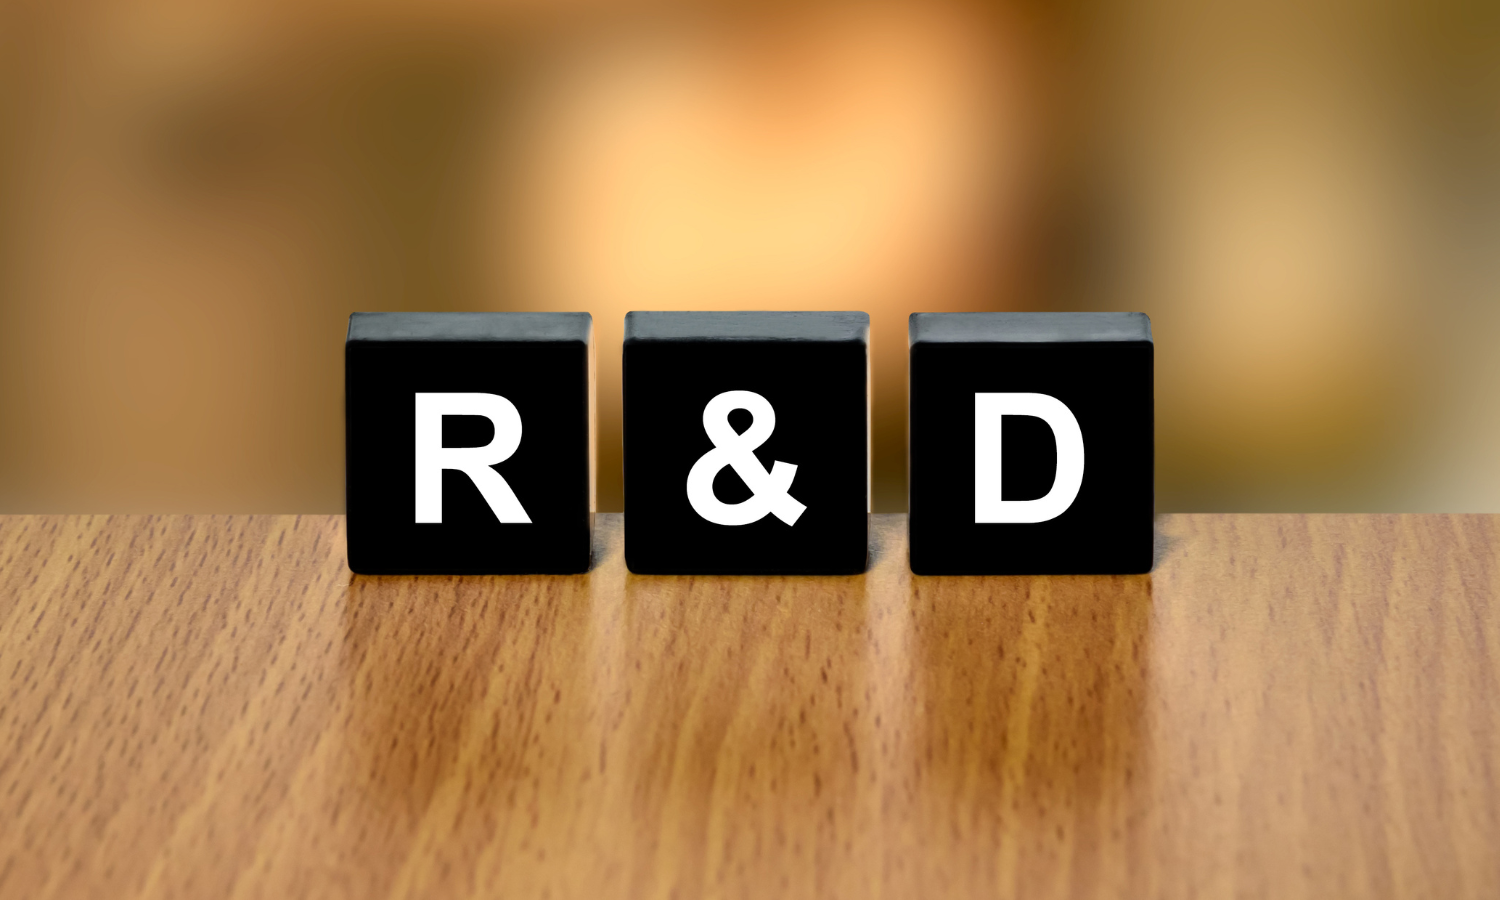 R&D is in three black letter blocks on a table with a blurred gold background